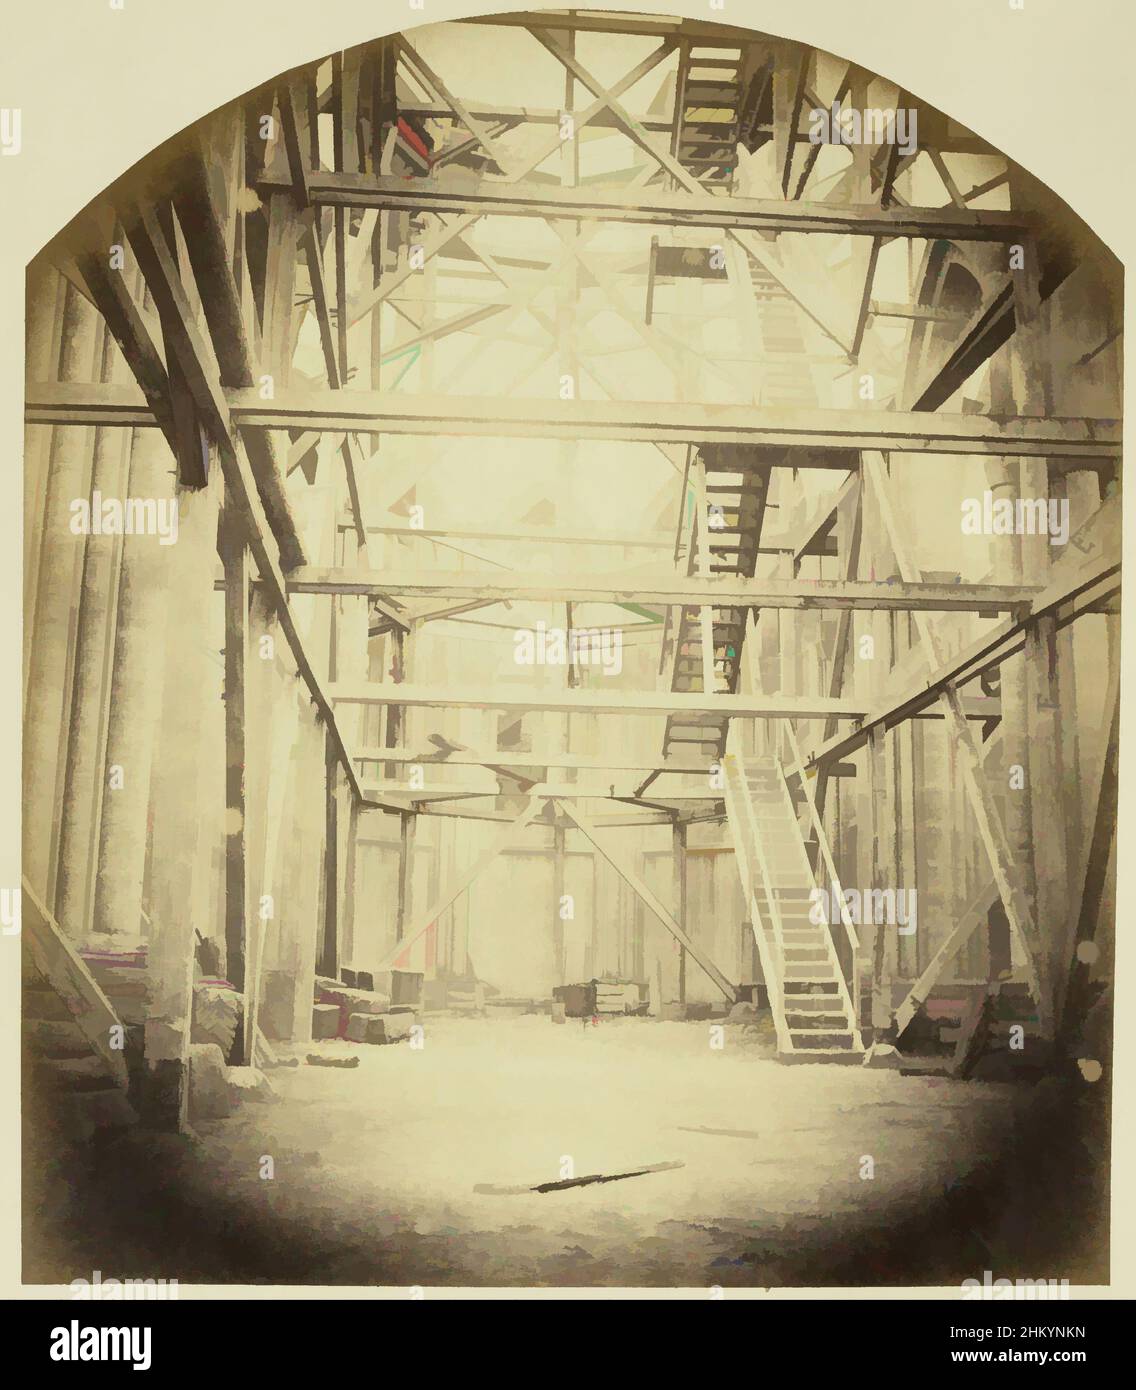 Art inspired by Saint-Vincent-de-Paul Church in Marseille under construction, Adolphe Terris (attributed to), Fred Vitigliano (attributed to), Marseille, 1855 - 1860, paper, cardboard, albumen print, height 192 mm × width 165 mmheight 371 mm × width 296 mm, Classic works modernized by Artotop with a splash of modernity. Shapes, color and value, eye-catching visual impact on art. Emotions through freedom of artworks in a contemporary way. A timeless message pursuing a wildly creative new direction. Artists turning to the digital medium and creating the Artotop NFT Stock Photo